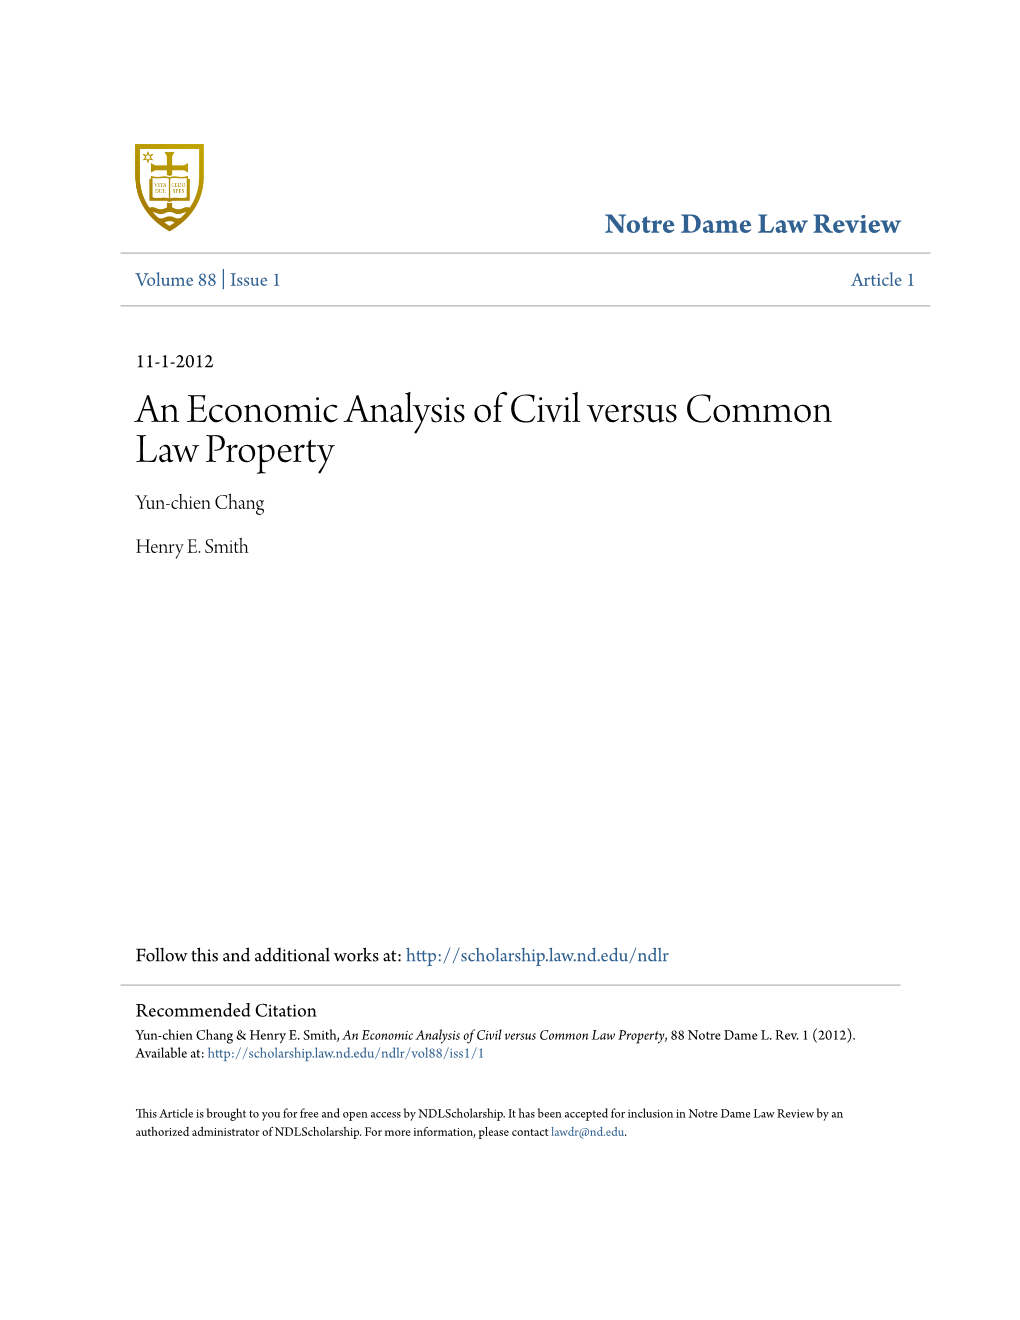 An Economic Analysis of Civil Versus Common Law Property Yun-Chien Chang